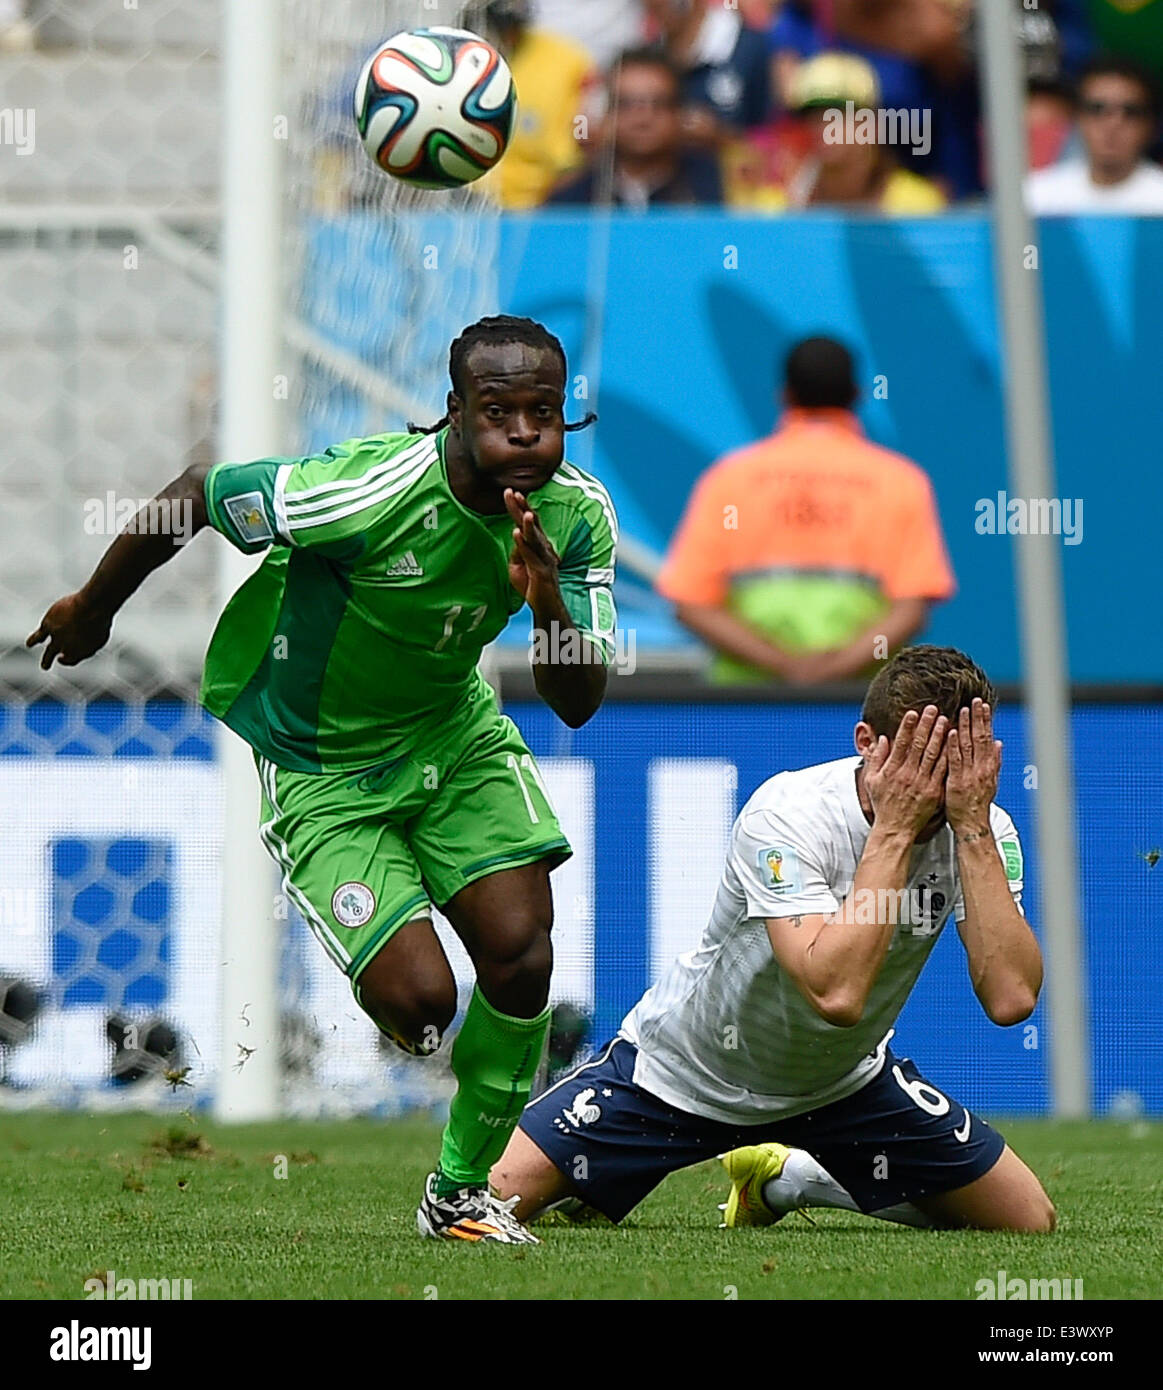 Brasilia, Brazil. 30th June, 2014. France's Yohan Cabaye vies with Nigeria's Victor Moses during a Round of 16 match between France and Nigeria of 2014 FIFA World Cup at the Estadio Nacional Stadium in Brasilia, Brazil, on June 30, 2014. France won 2-0 over Nigeria and qualified for quarter-finals here on Monday. Credit:  Xinhua/Alamy Live News Stock Photo